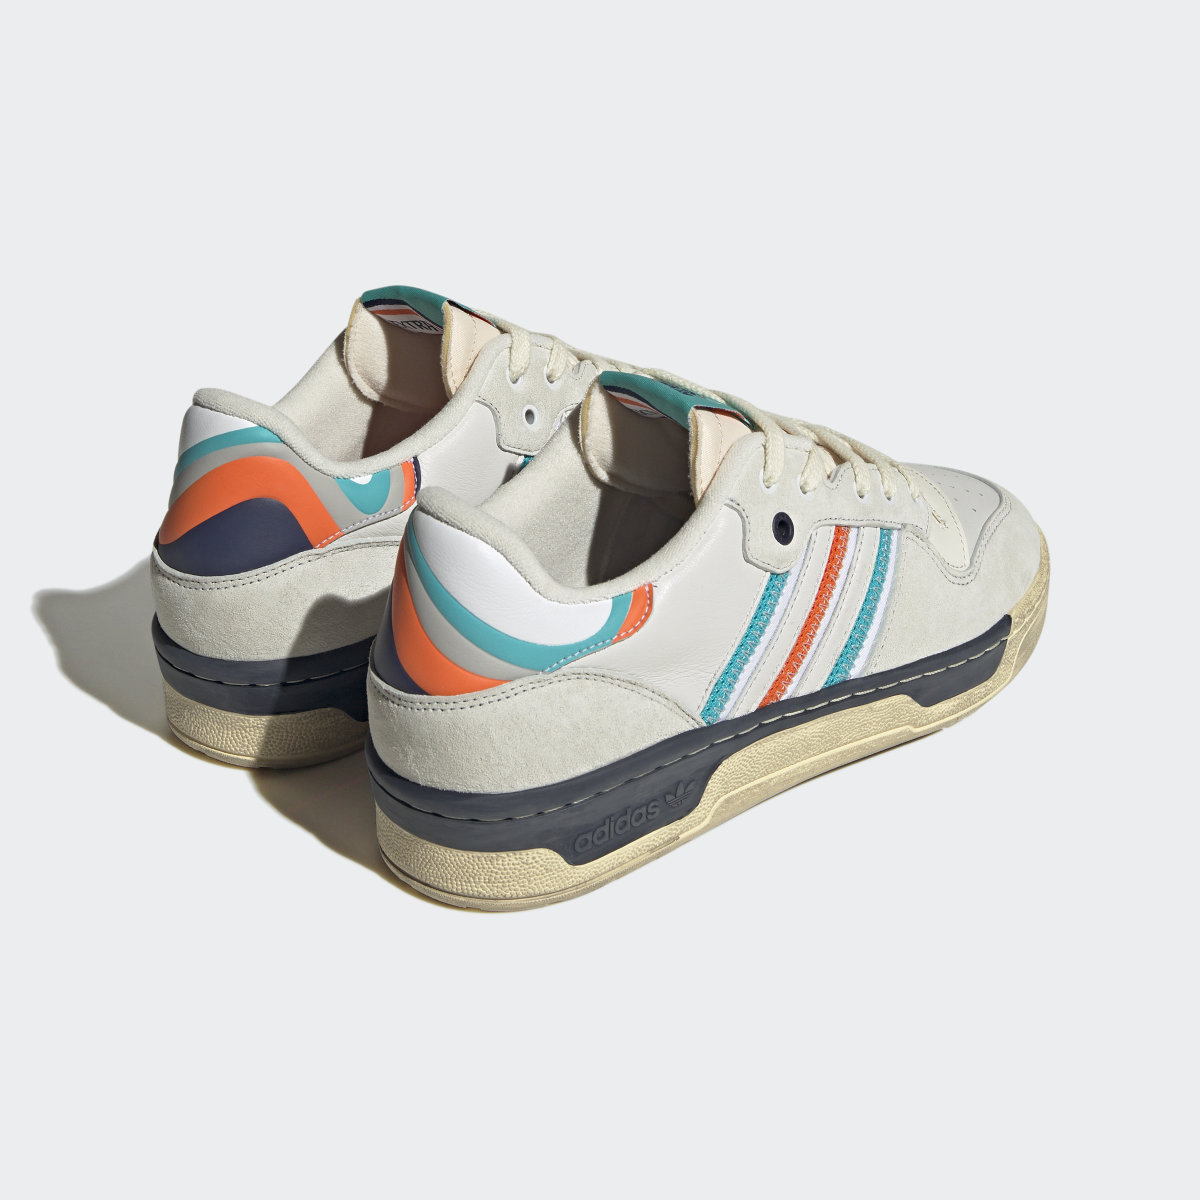 Adidas Rivalry Low Extra Butter Shoes. 7